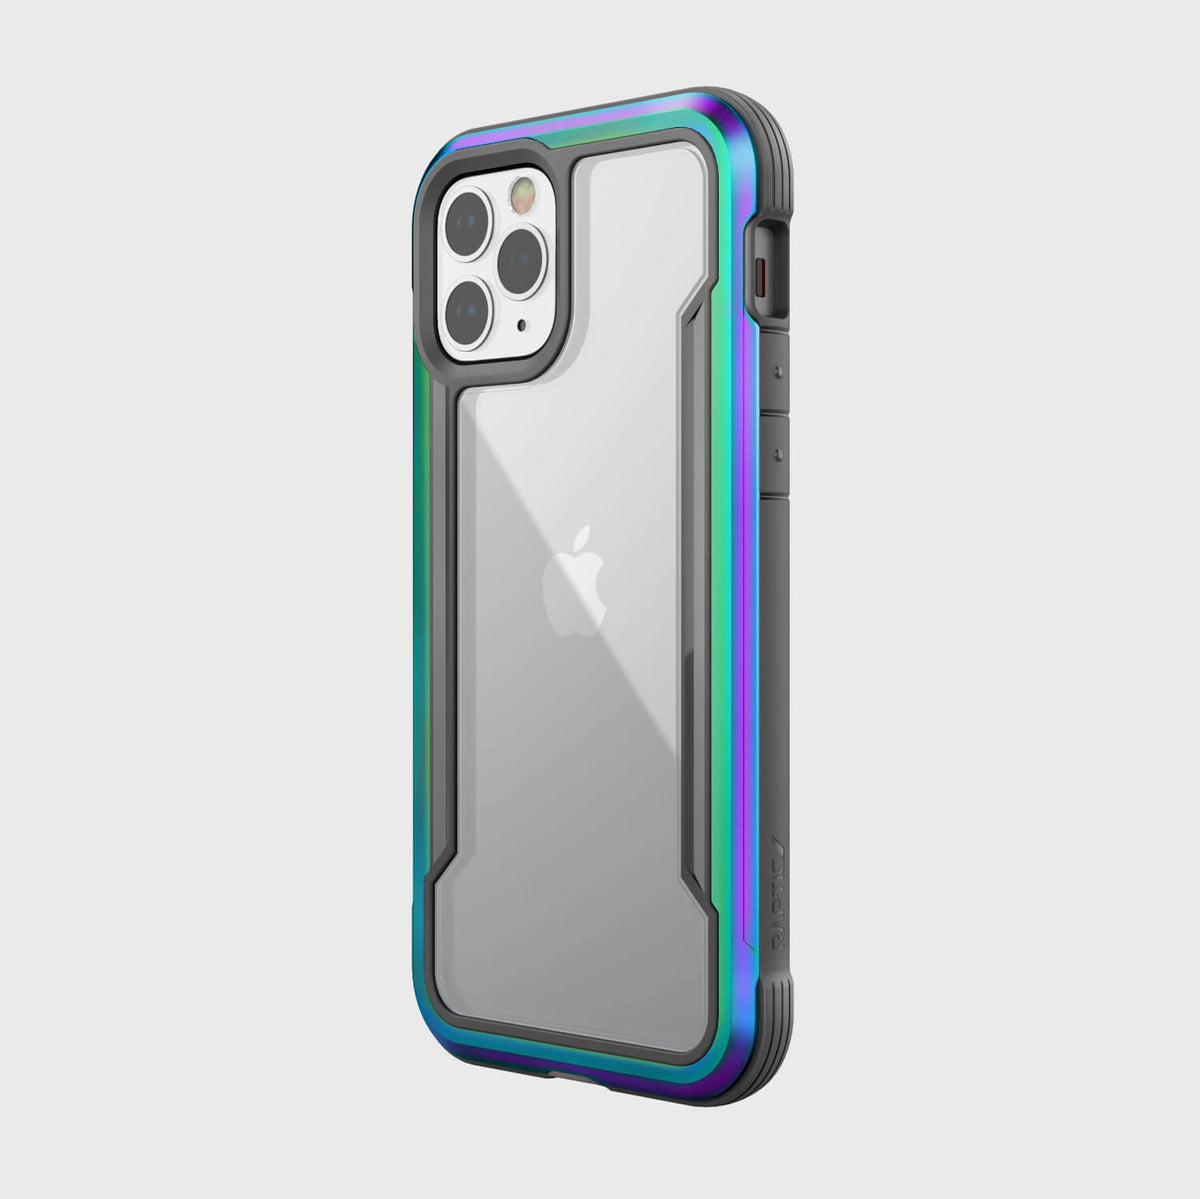 The back view of the Raptic iPhone 12 & iPhone 12 Pro Case - SHIELD showing its protection.